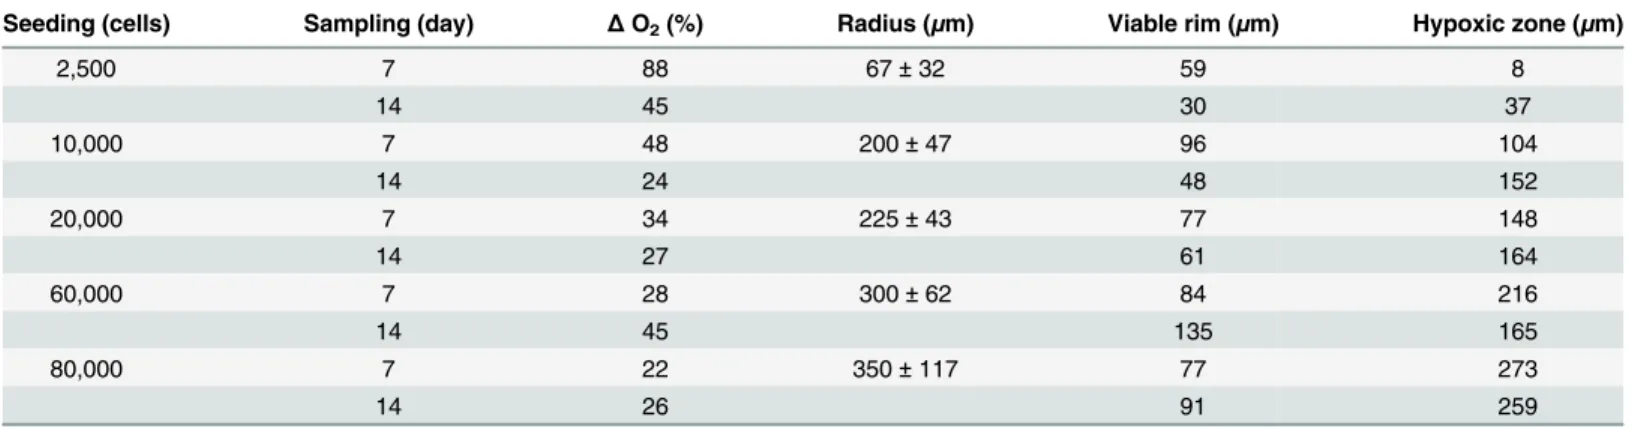 Table 1. Physiological differences between spheroids of varying sizes at separate sampling times